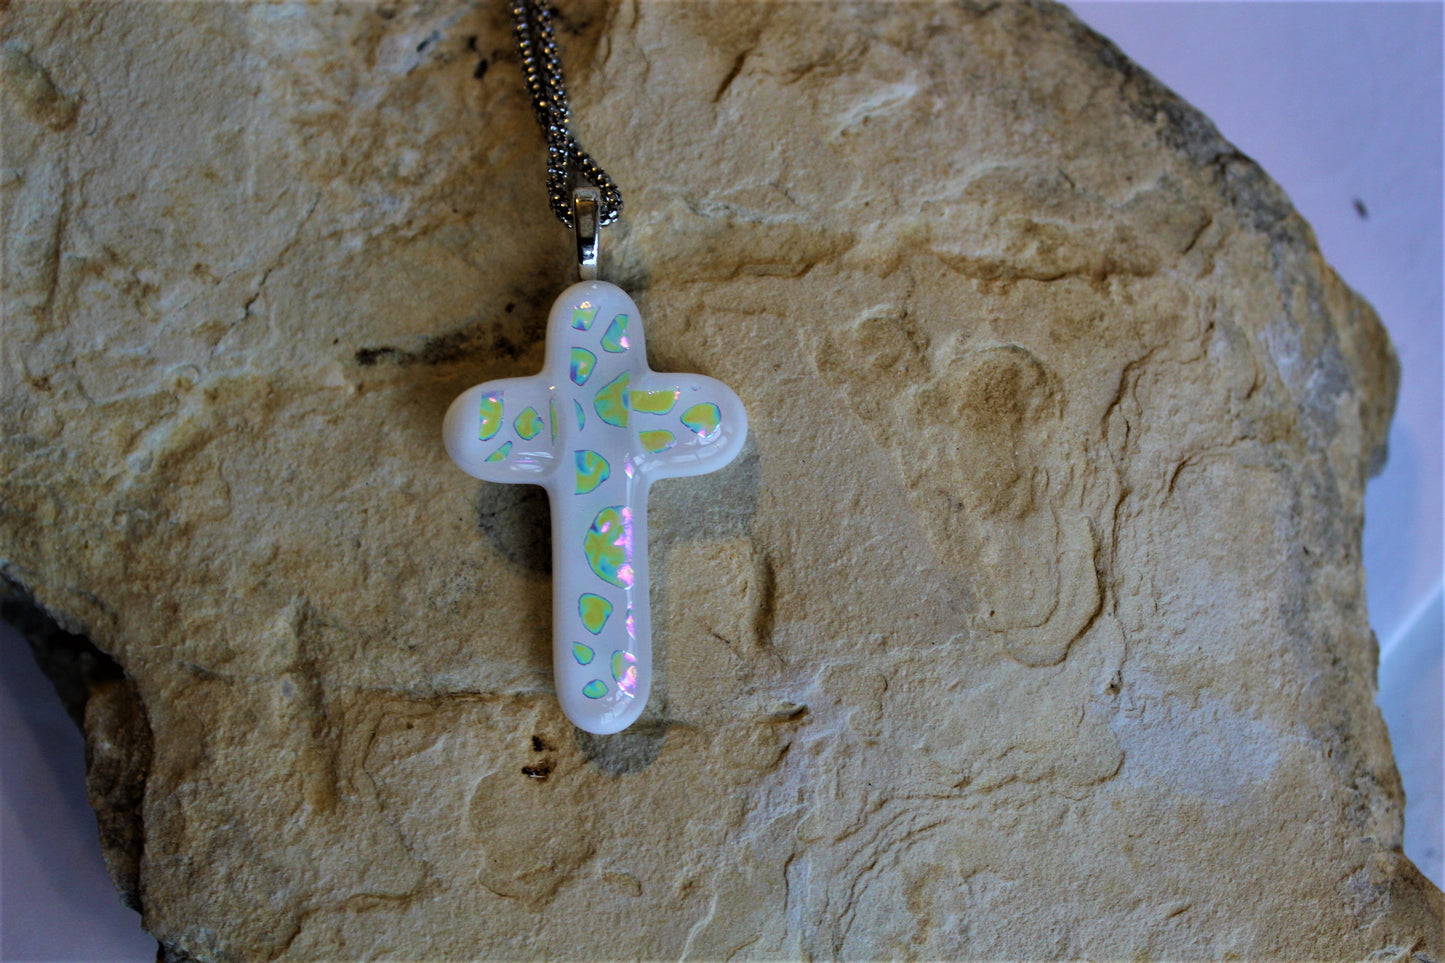 White Dichroic Glass Cross Pendant with Chain